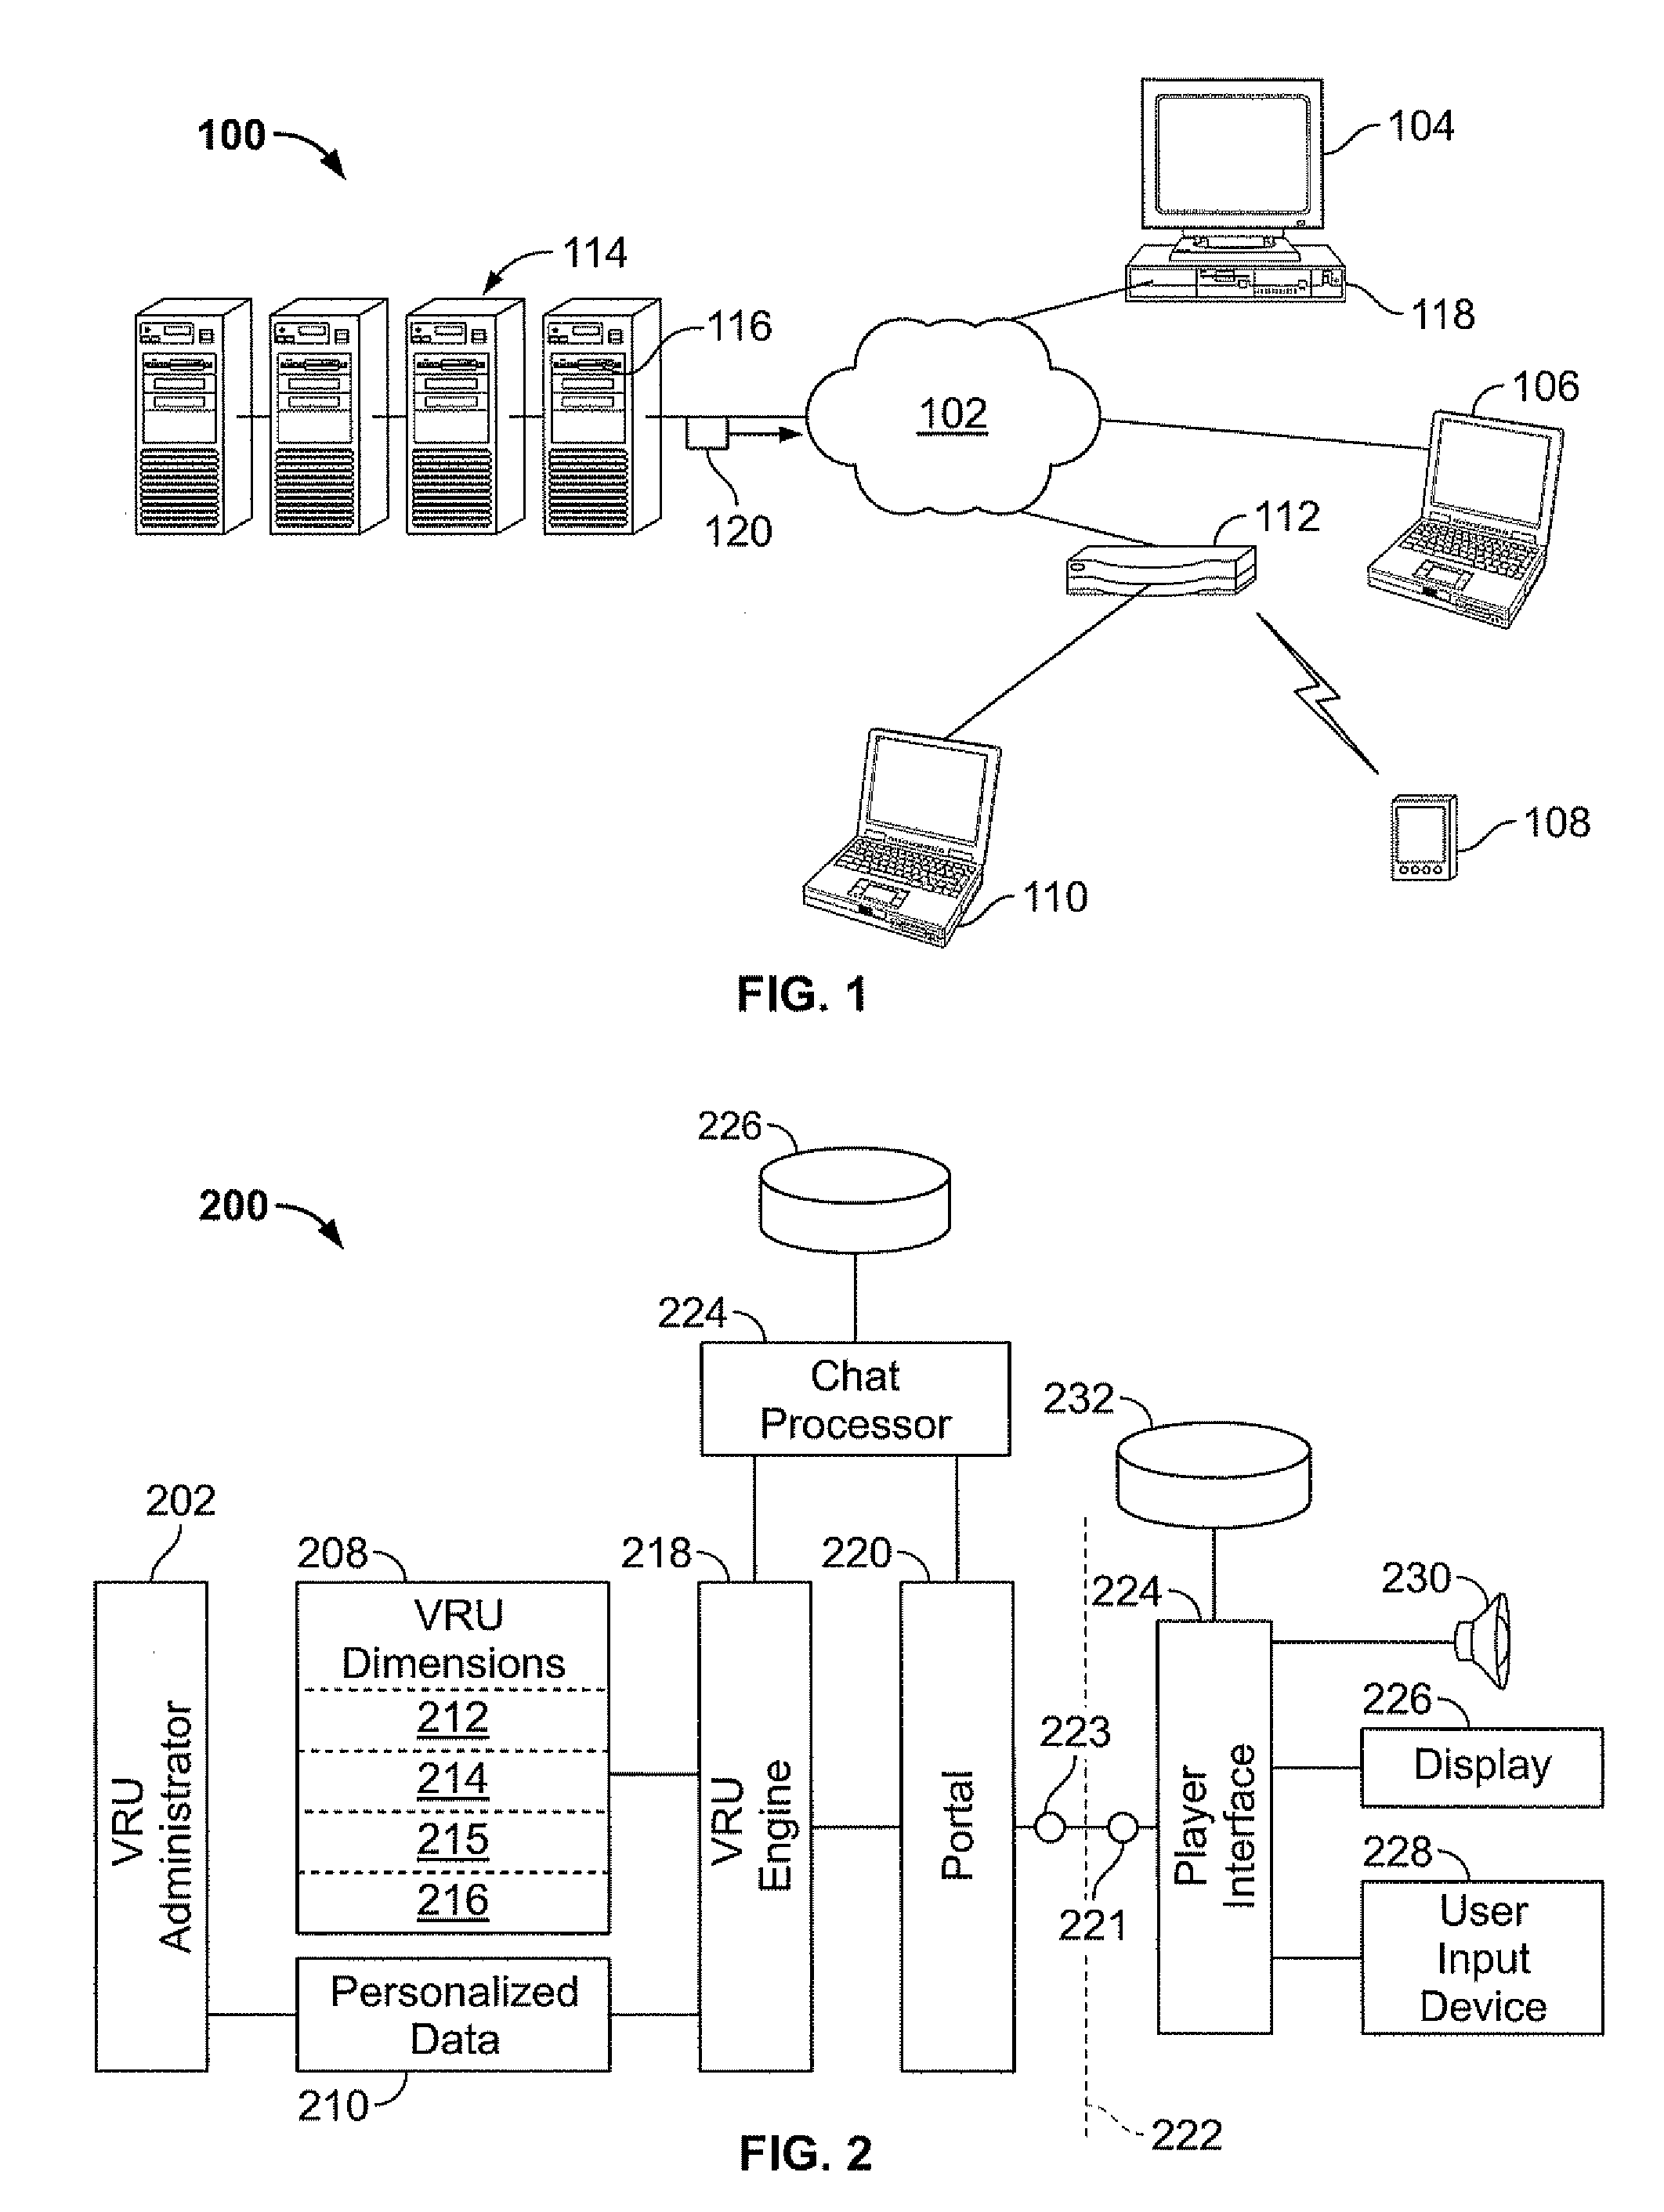 Multi-instance, multi-user animation with coordinated chat